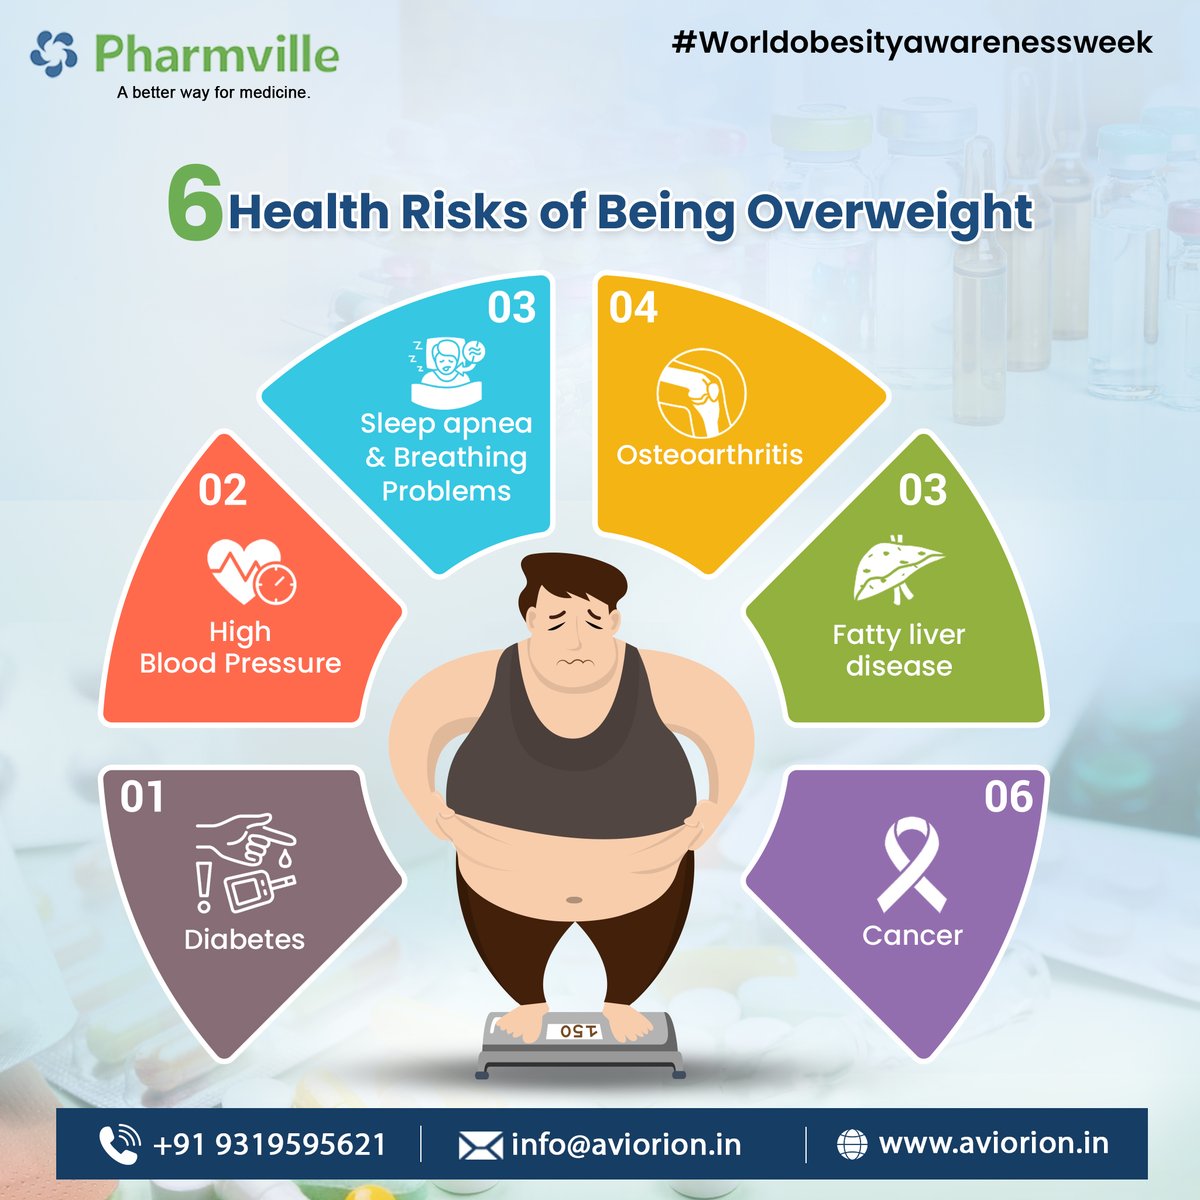 Obesity Awareness Week reminds us that health is a journey, not a destination. Let's support each other in making positive, sustainable choices for a healthier future!💚🥦
#aviorion #aviorionpvtltd #pharmville #obesityawarenessweek #healthforall #endweightstigma #healthychoices